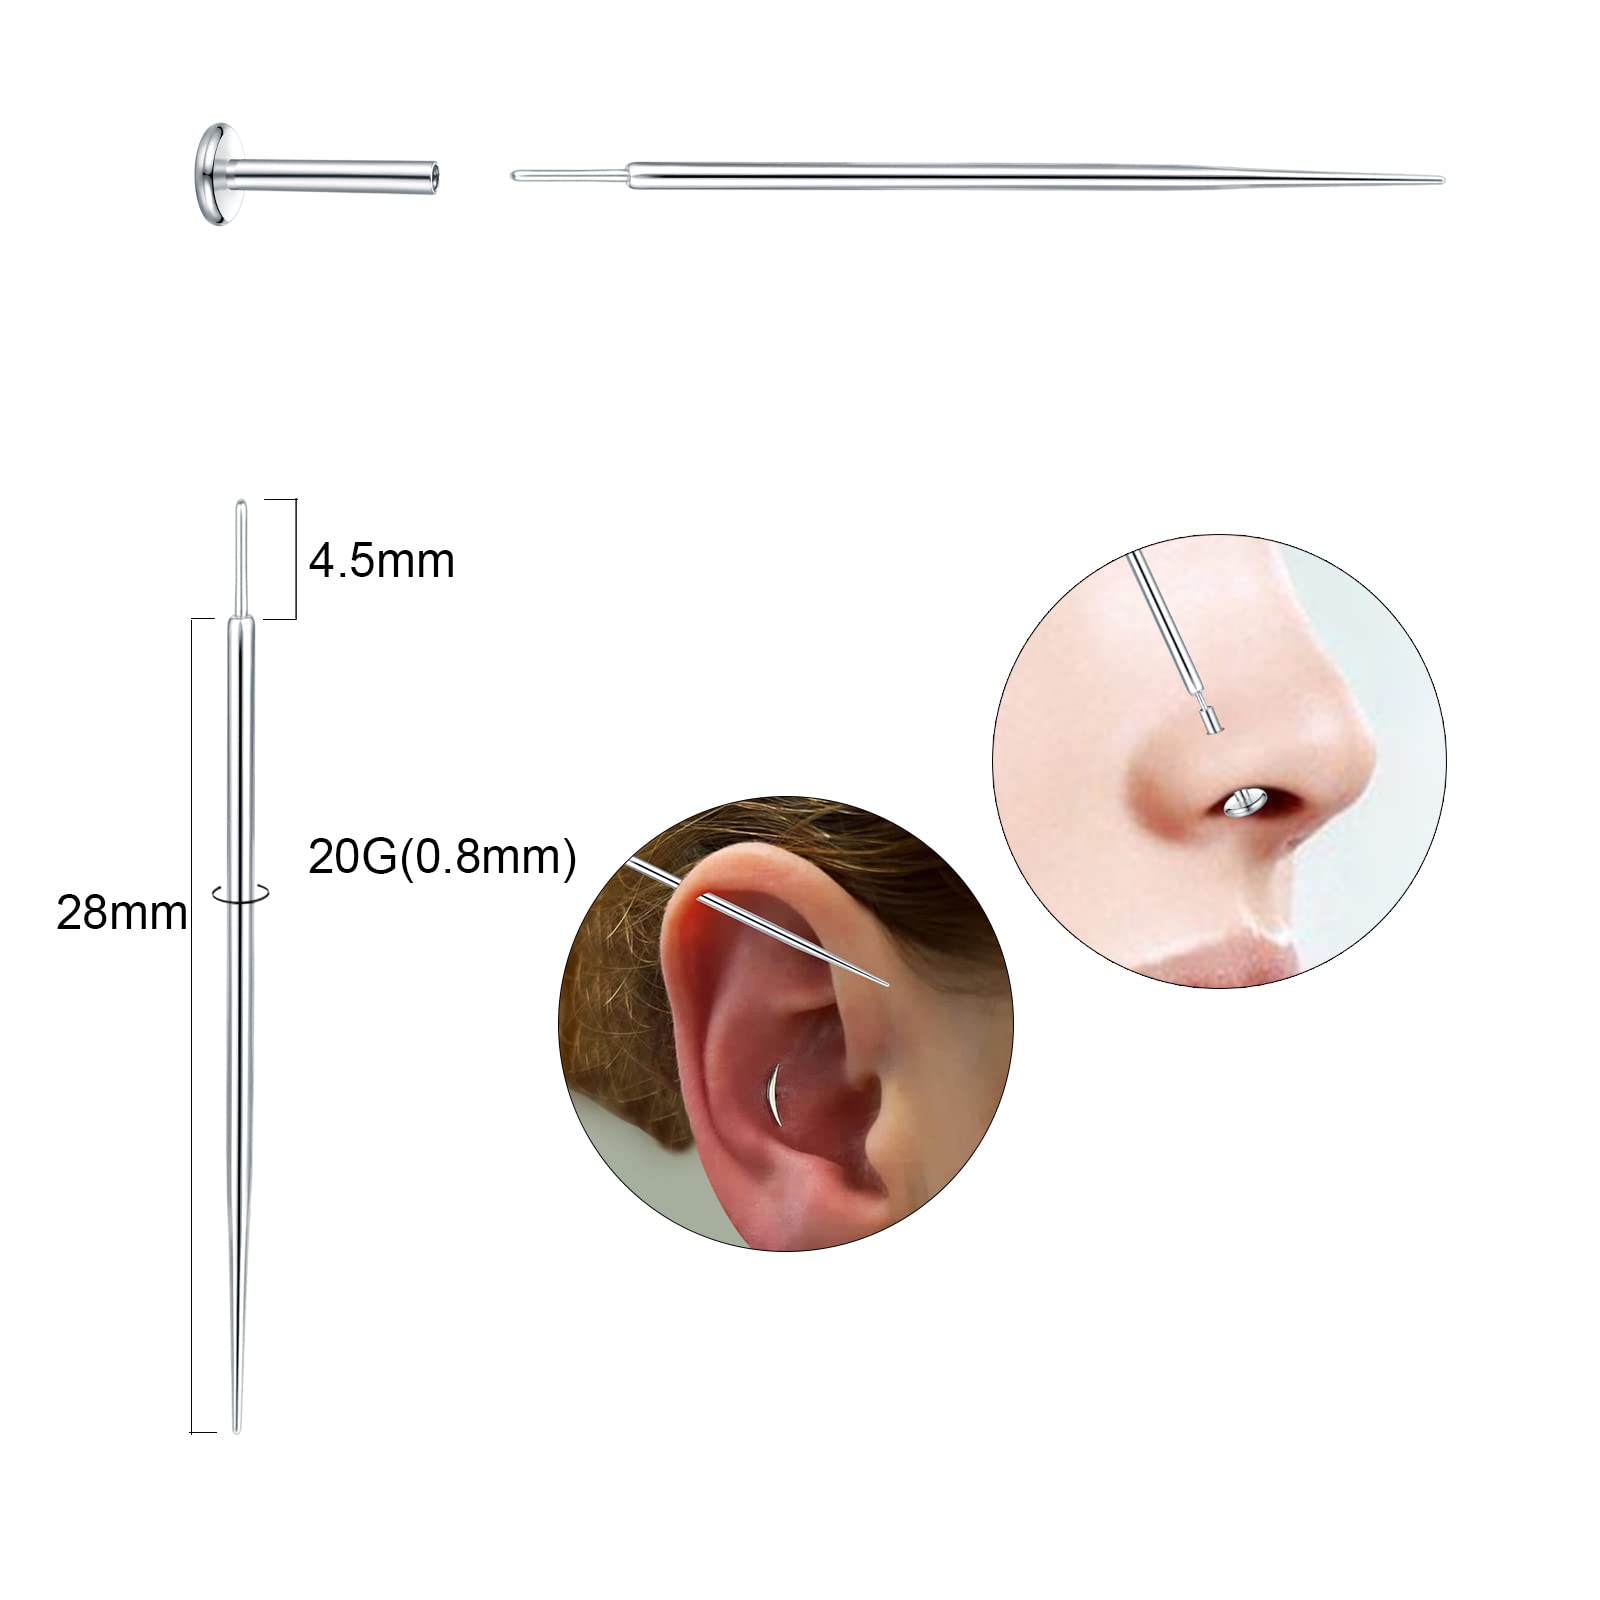 Xpircn Threadless Piercing Taper 20G 18G 16G Stainless Steel Piercing Taper Insertion Pin for Lip Nose Monore Ear Cartilage Tragus Helix Eyebrow Tongue Body Piercing Stretching Kit Assistant Tools